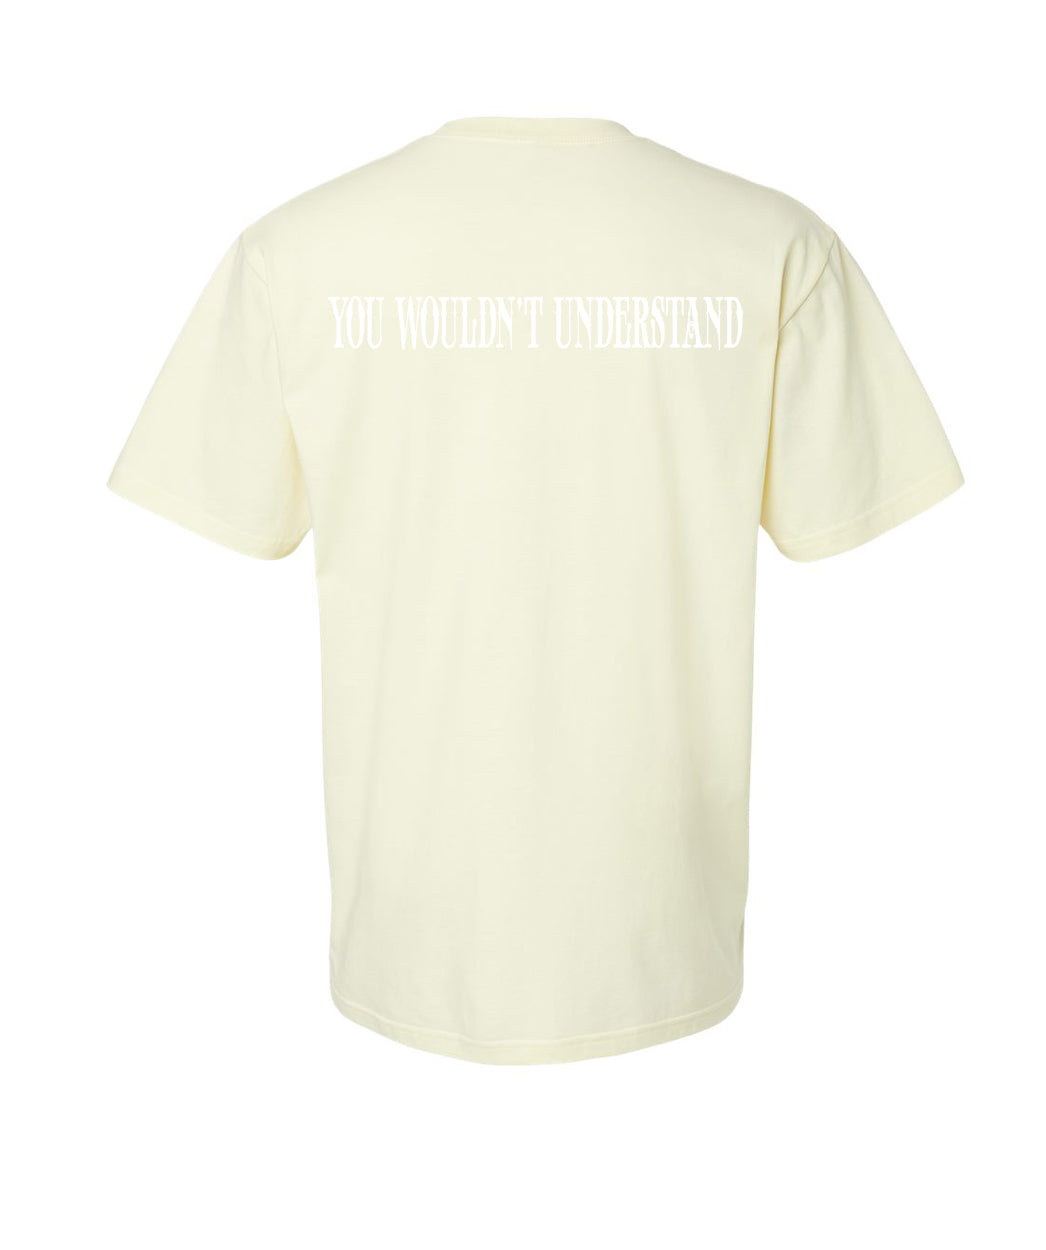 OL'NY You Wouldn't Understand Cream T-shirt